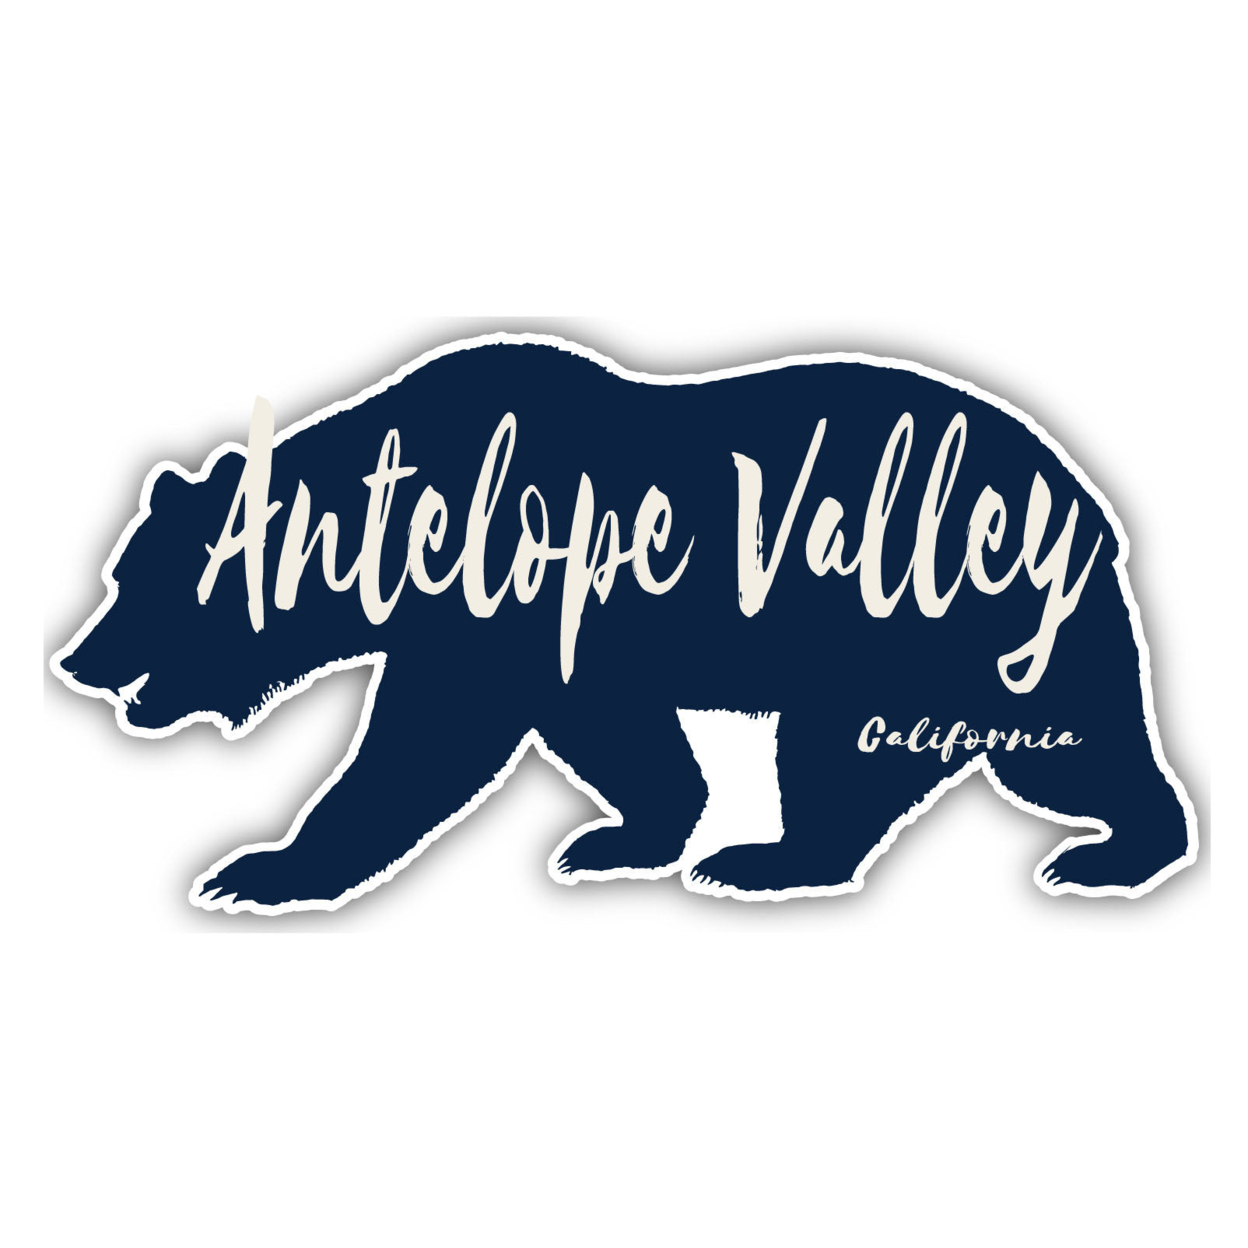 Antelope Valley California Souvenir Decorative Stickers (Choose Theme And Size) - 4-Pack, 10-Inch, Bear